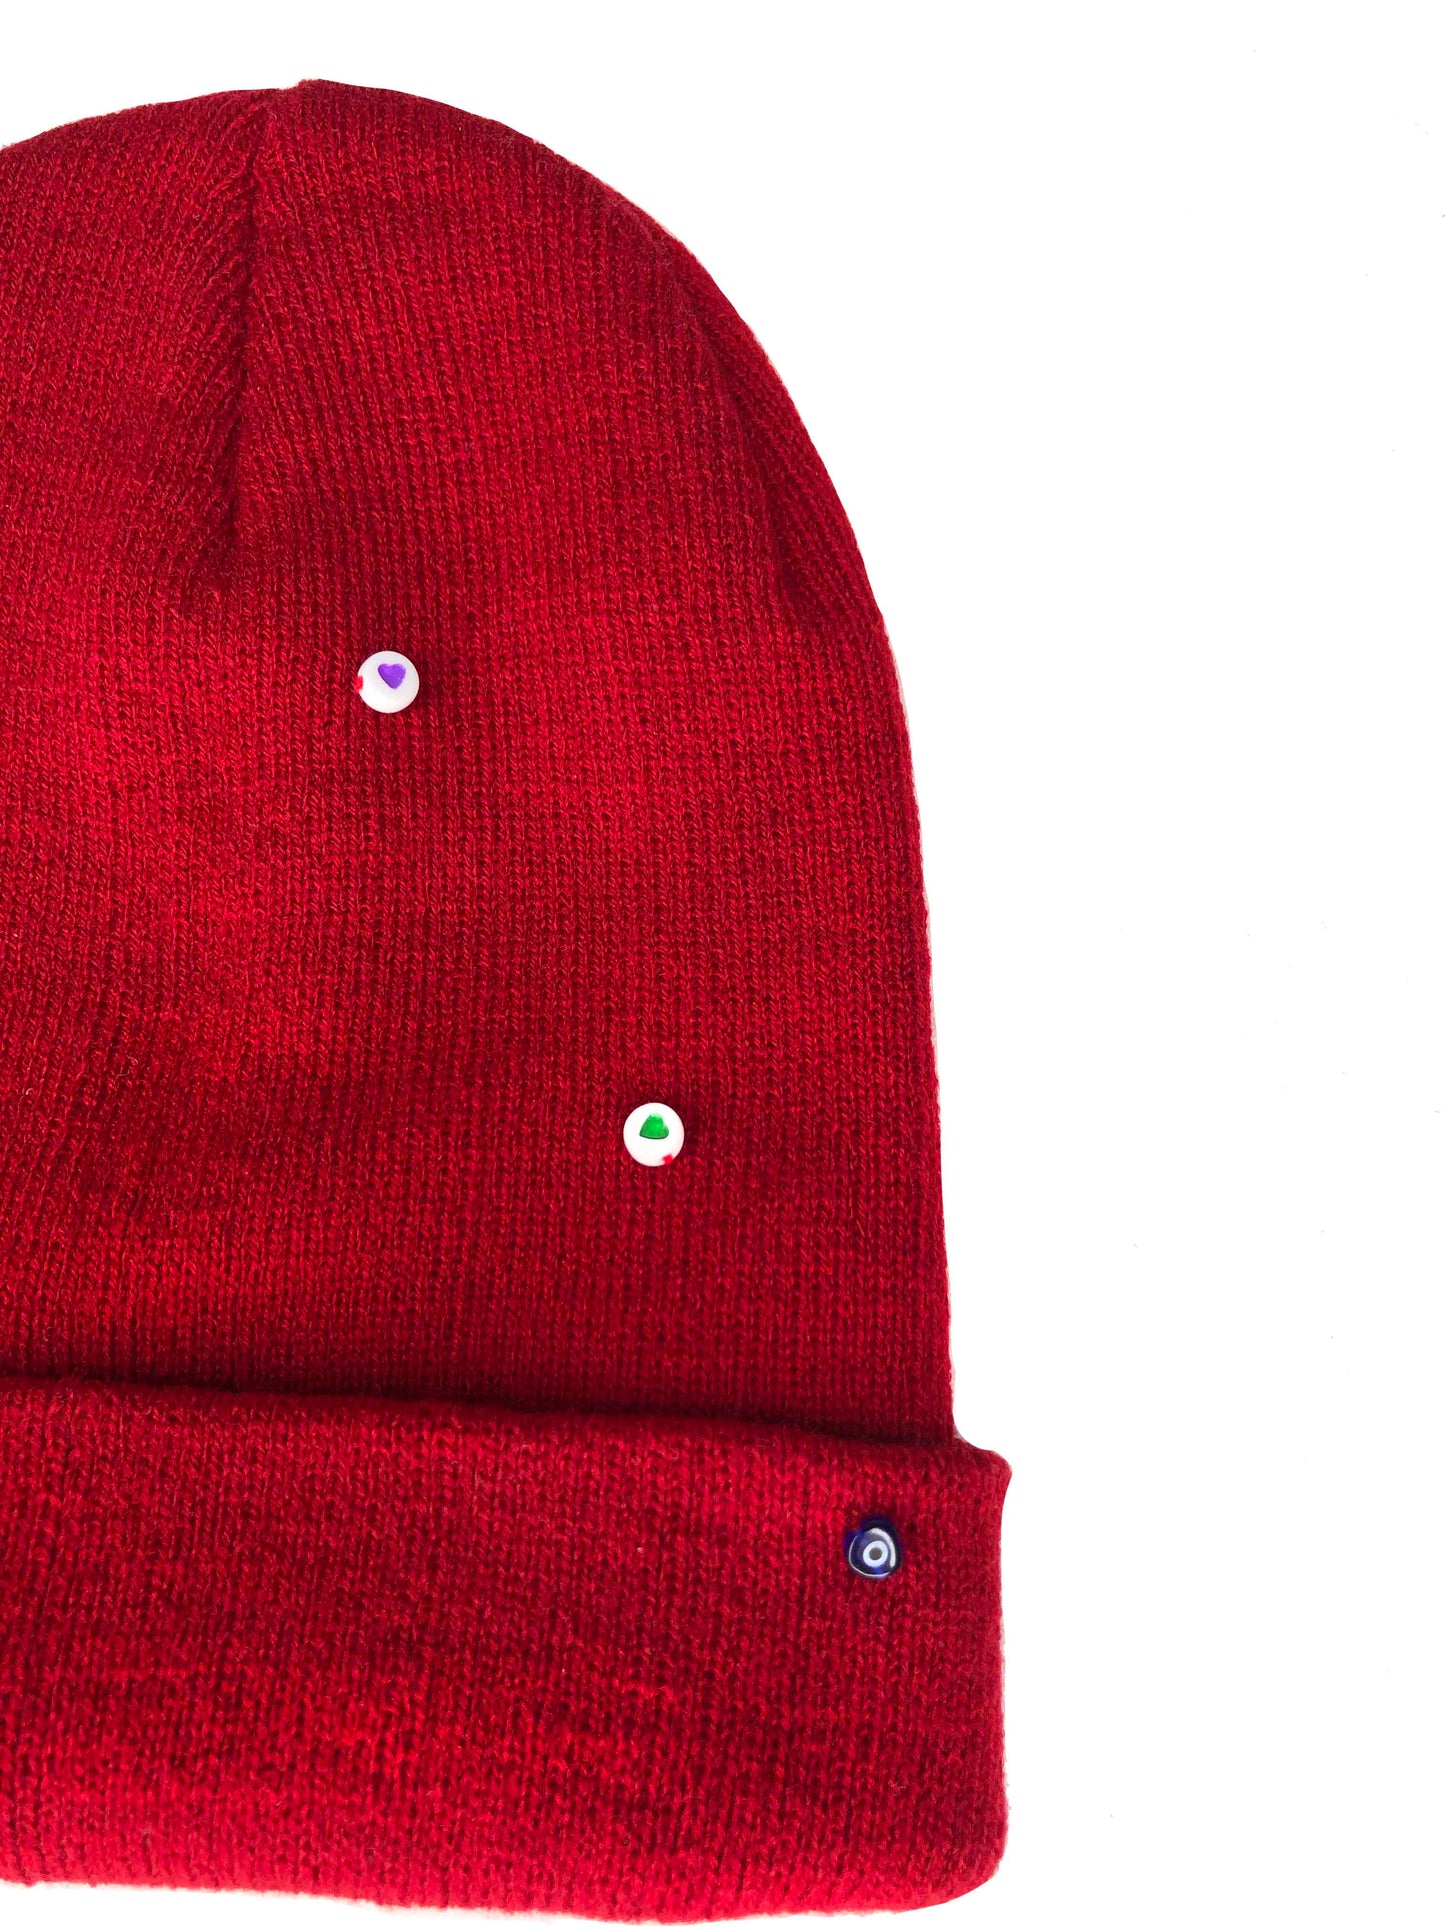 A red wool knit beanie decorated with both multicolor circle heart beads, and an evil eye charm.